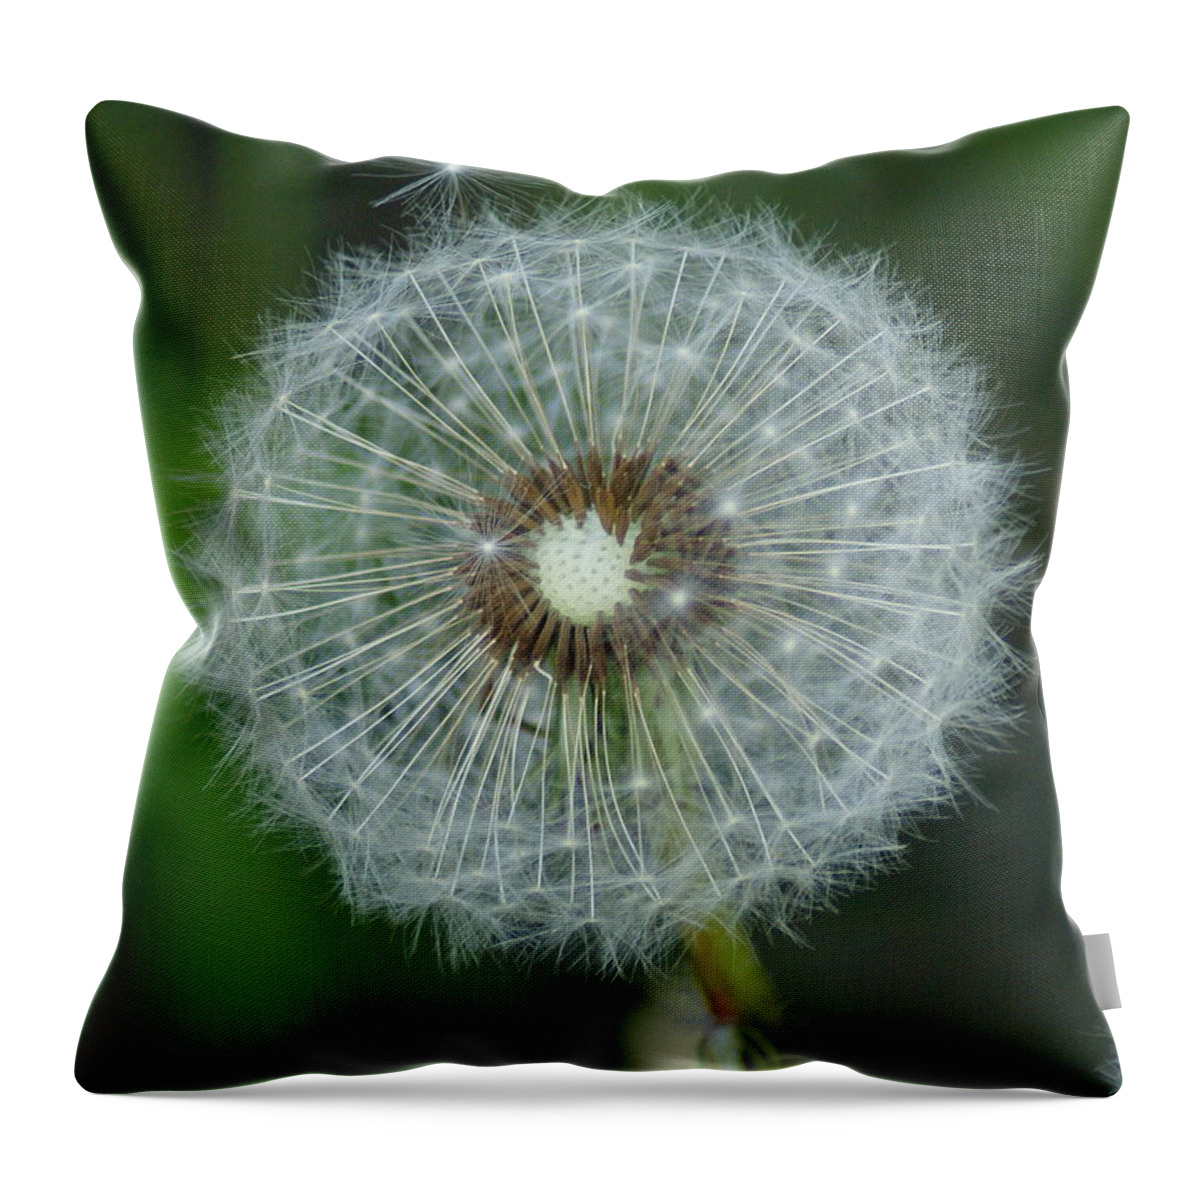 Flowers Throw Pillow featuring the photograph A Star Leaves Home by Ben Upham III